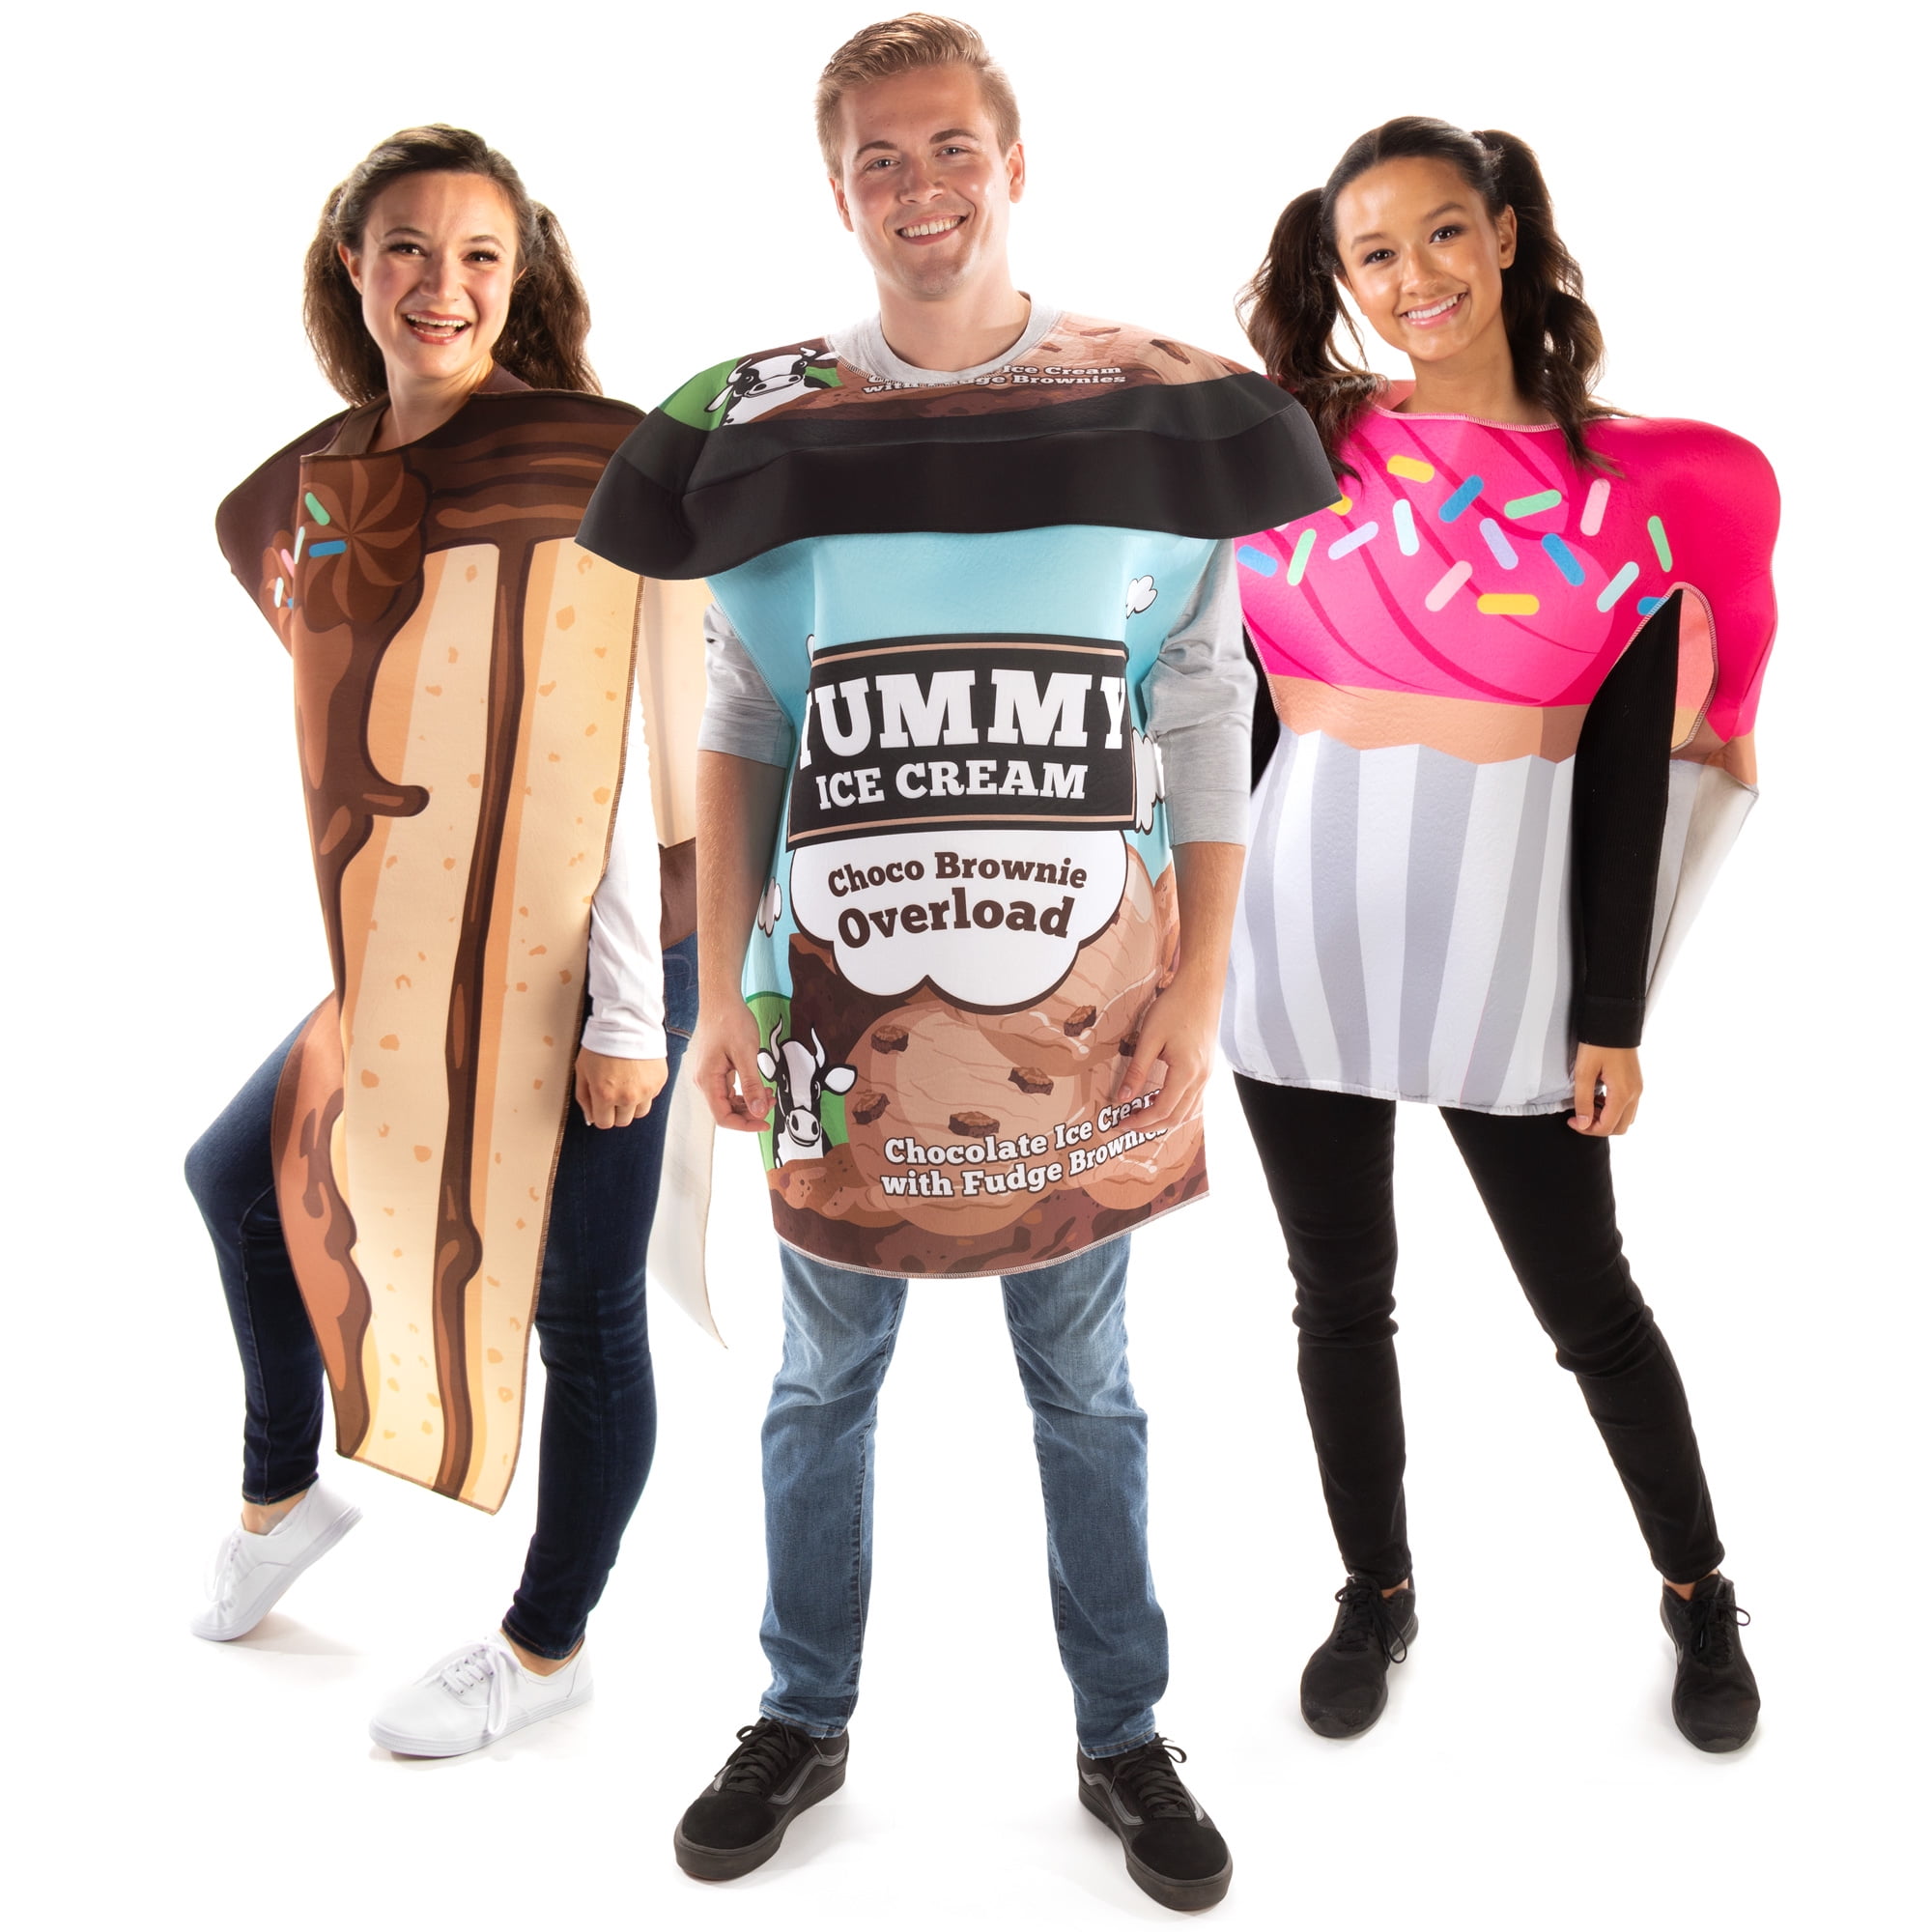 Snack Attack Group Halloween Costume - Unisex One-size Funny Food Costume 3-pack - Walmart.com